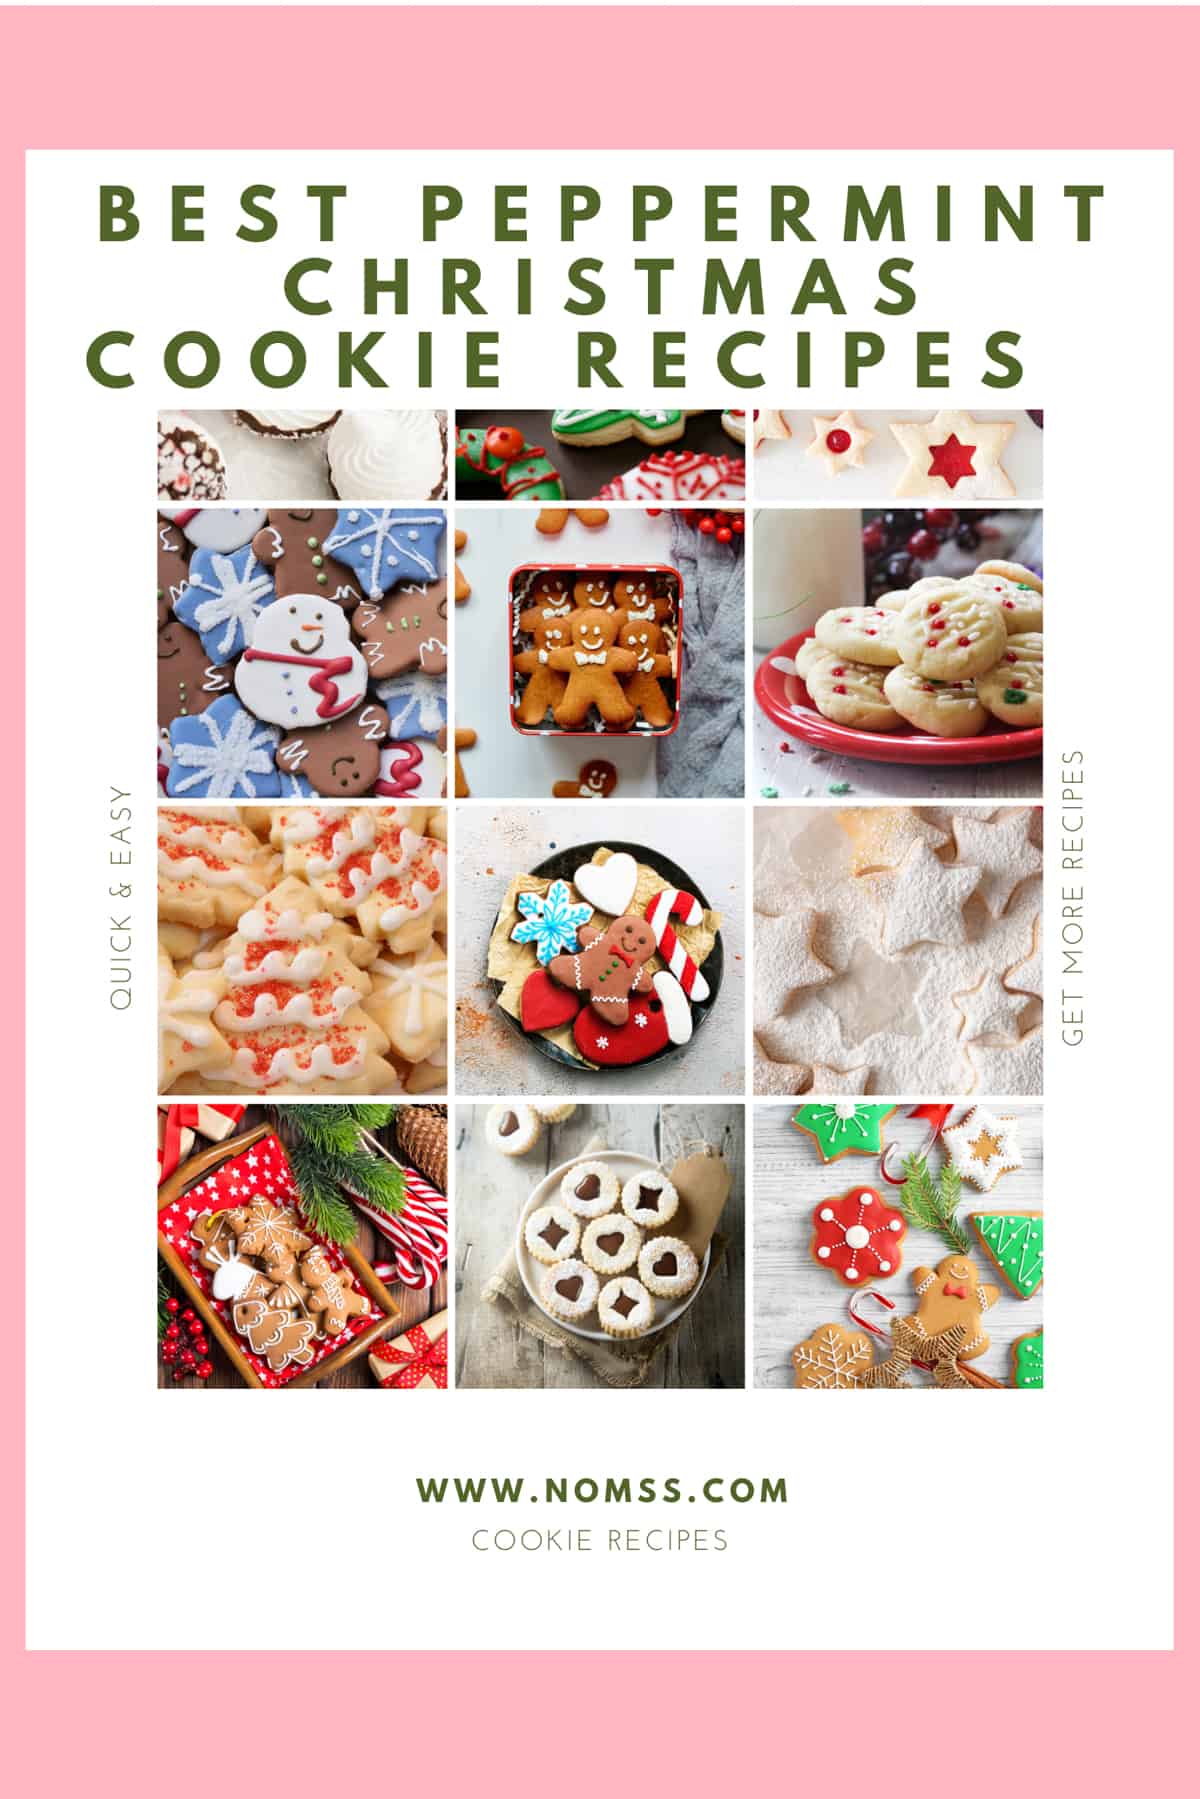 37 Best Christmas Cookie Recipes with Peppermint